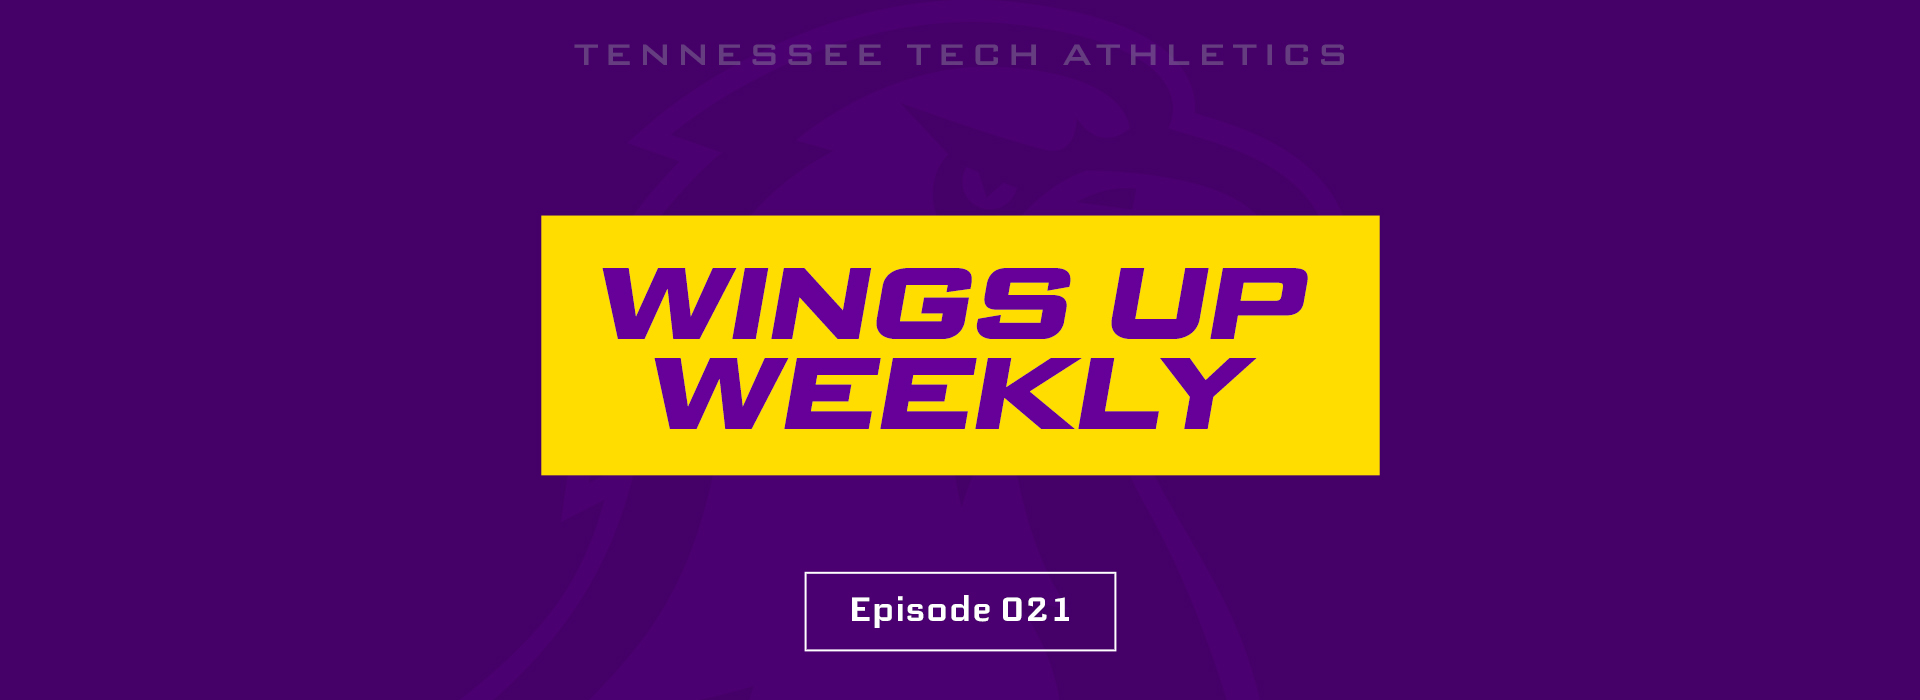 Wings Up Weekly: Episode 021 - featuring Tech Assistant AD Dr. Leveda Birdwell and FAR Dr. Jeff Roberts